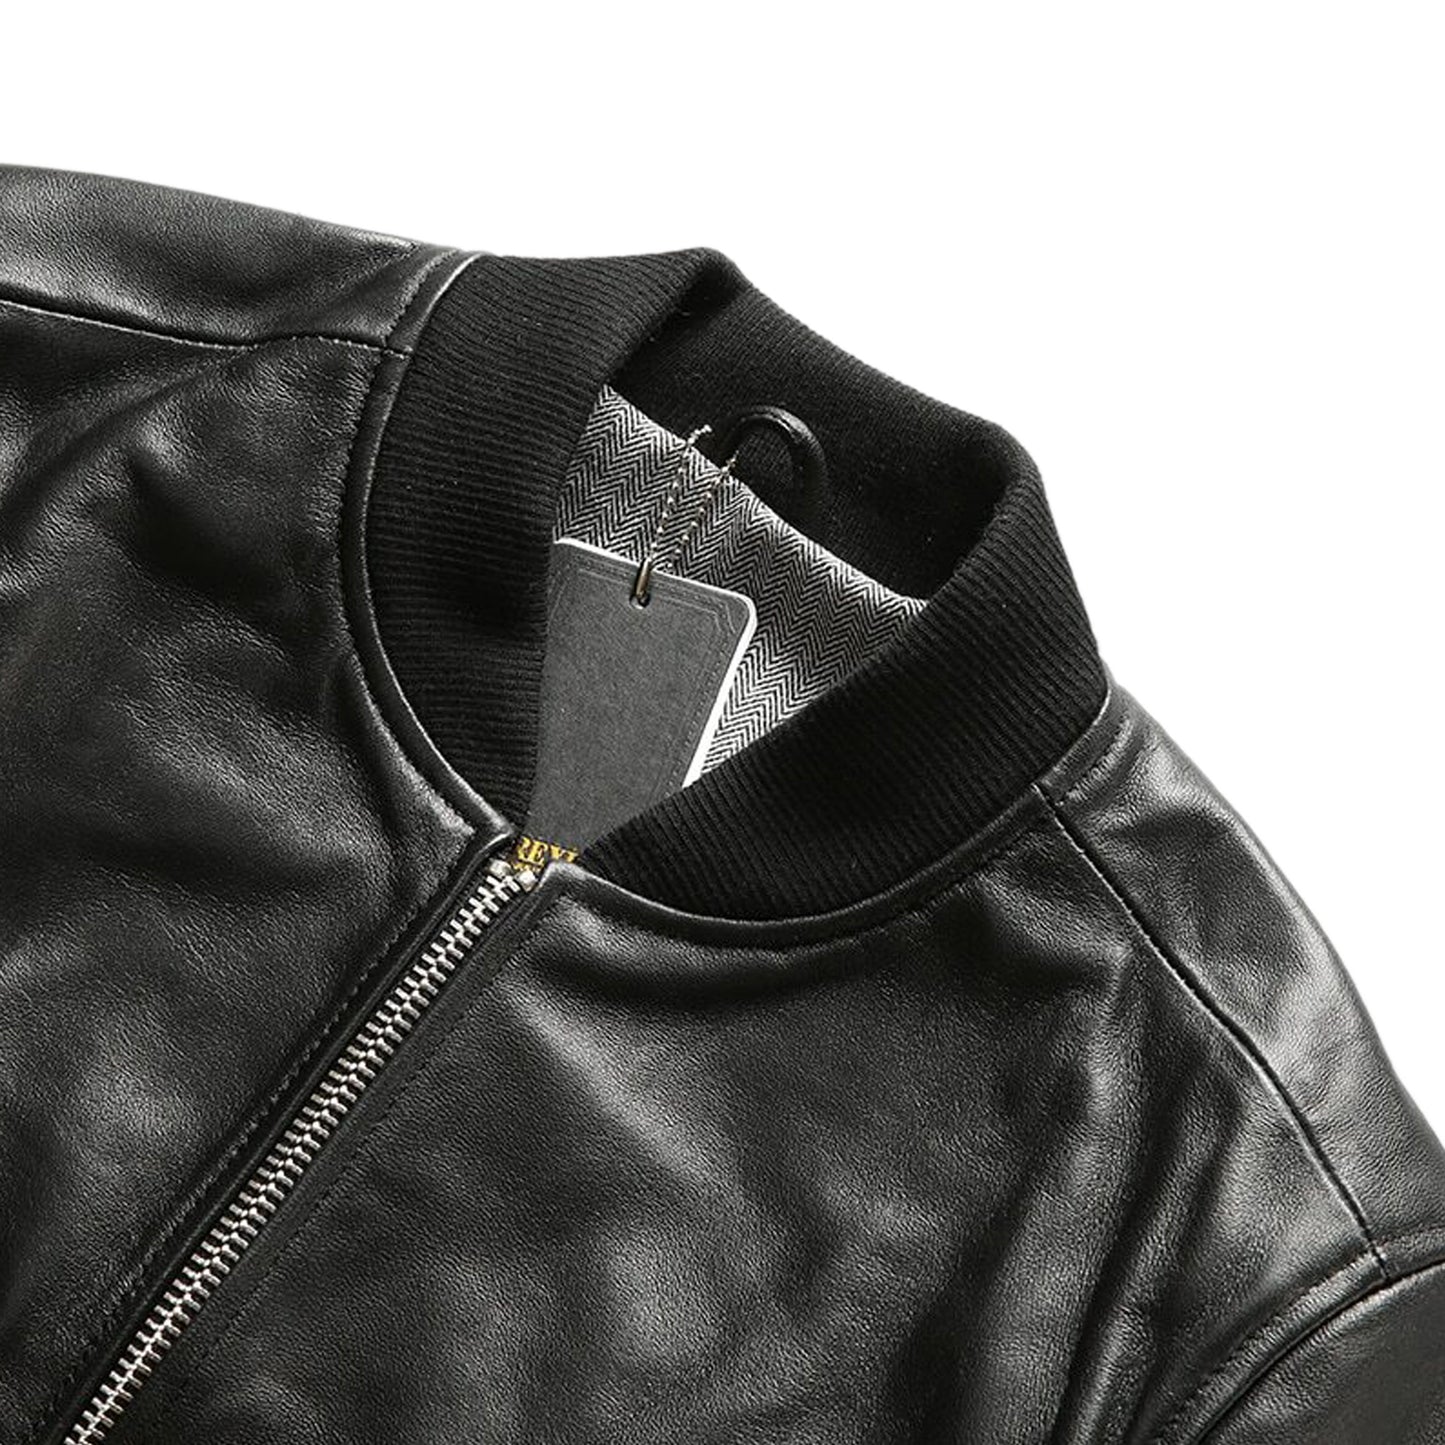 Men's Slim fit leather bomber jacket : The Lining bomber